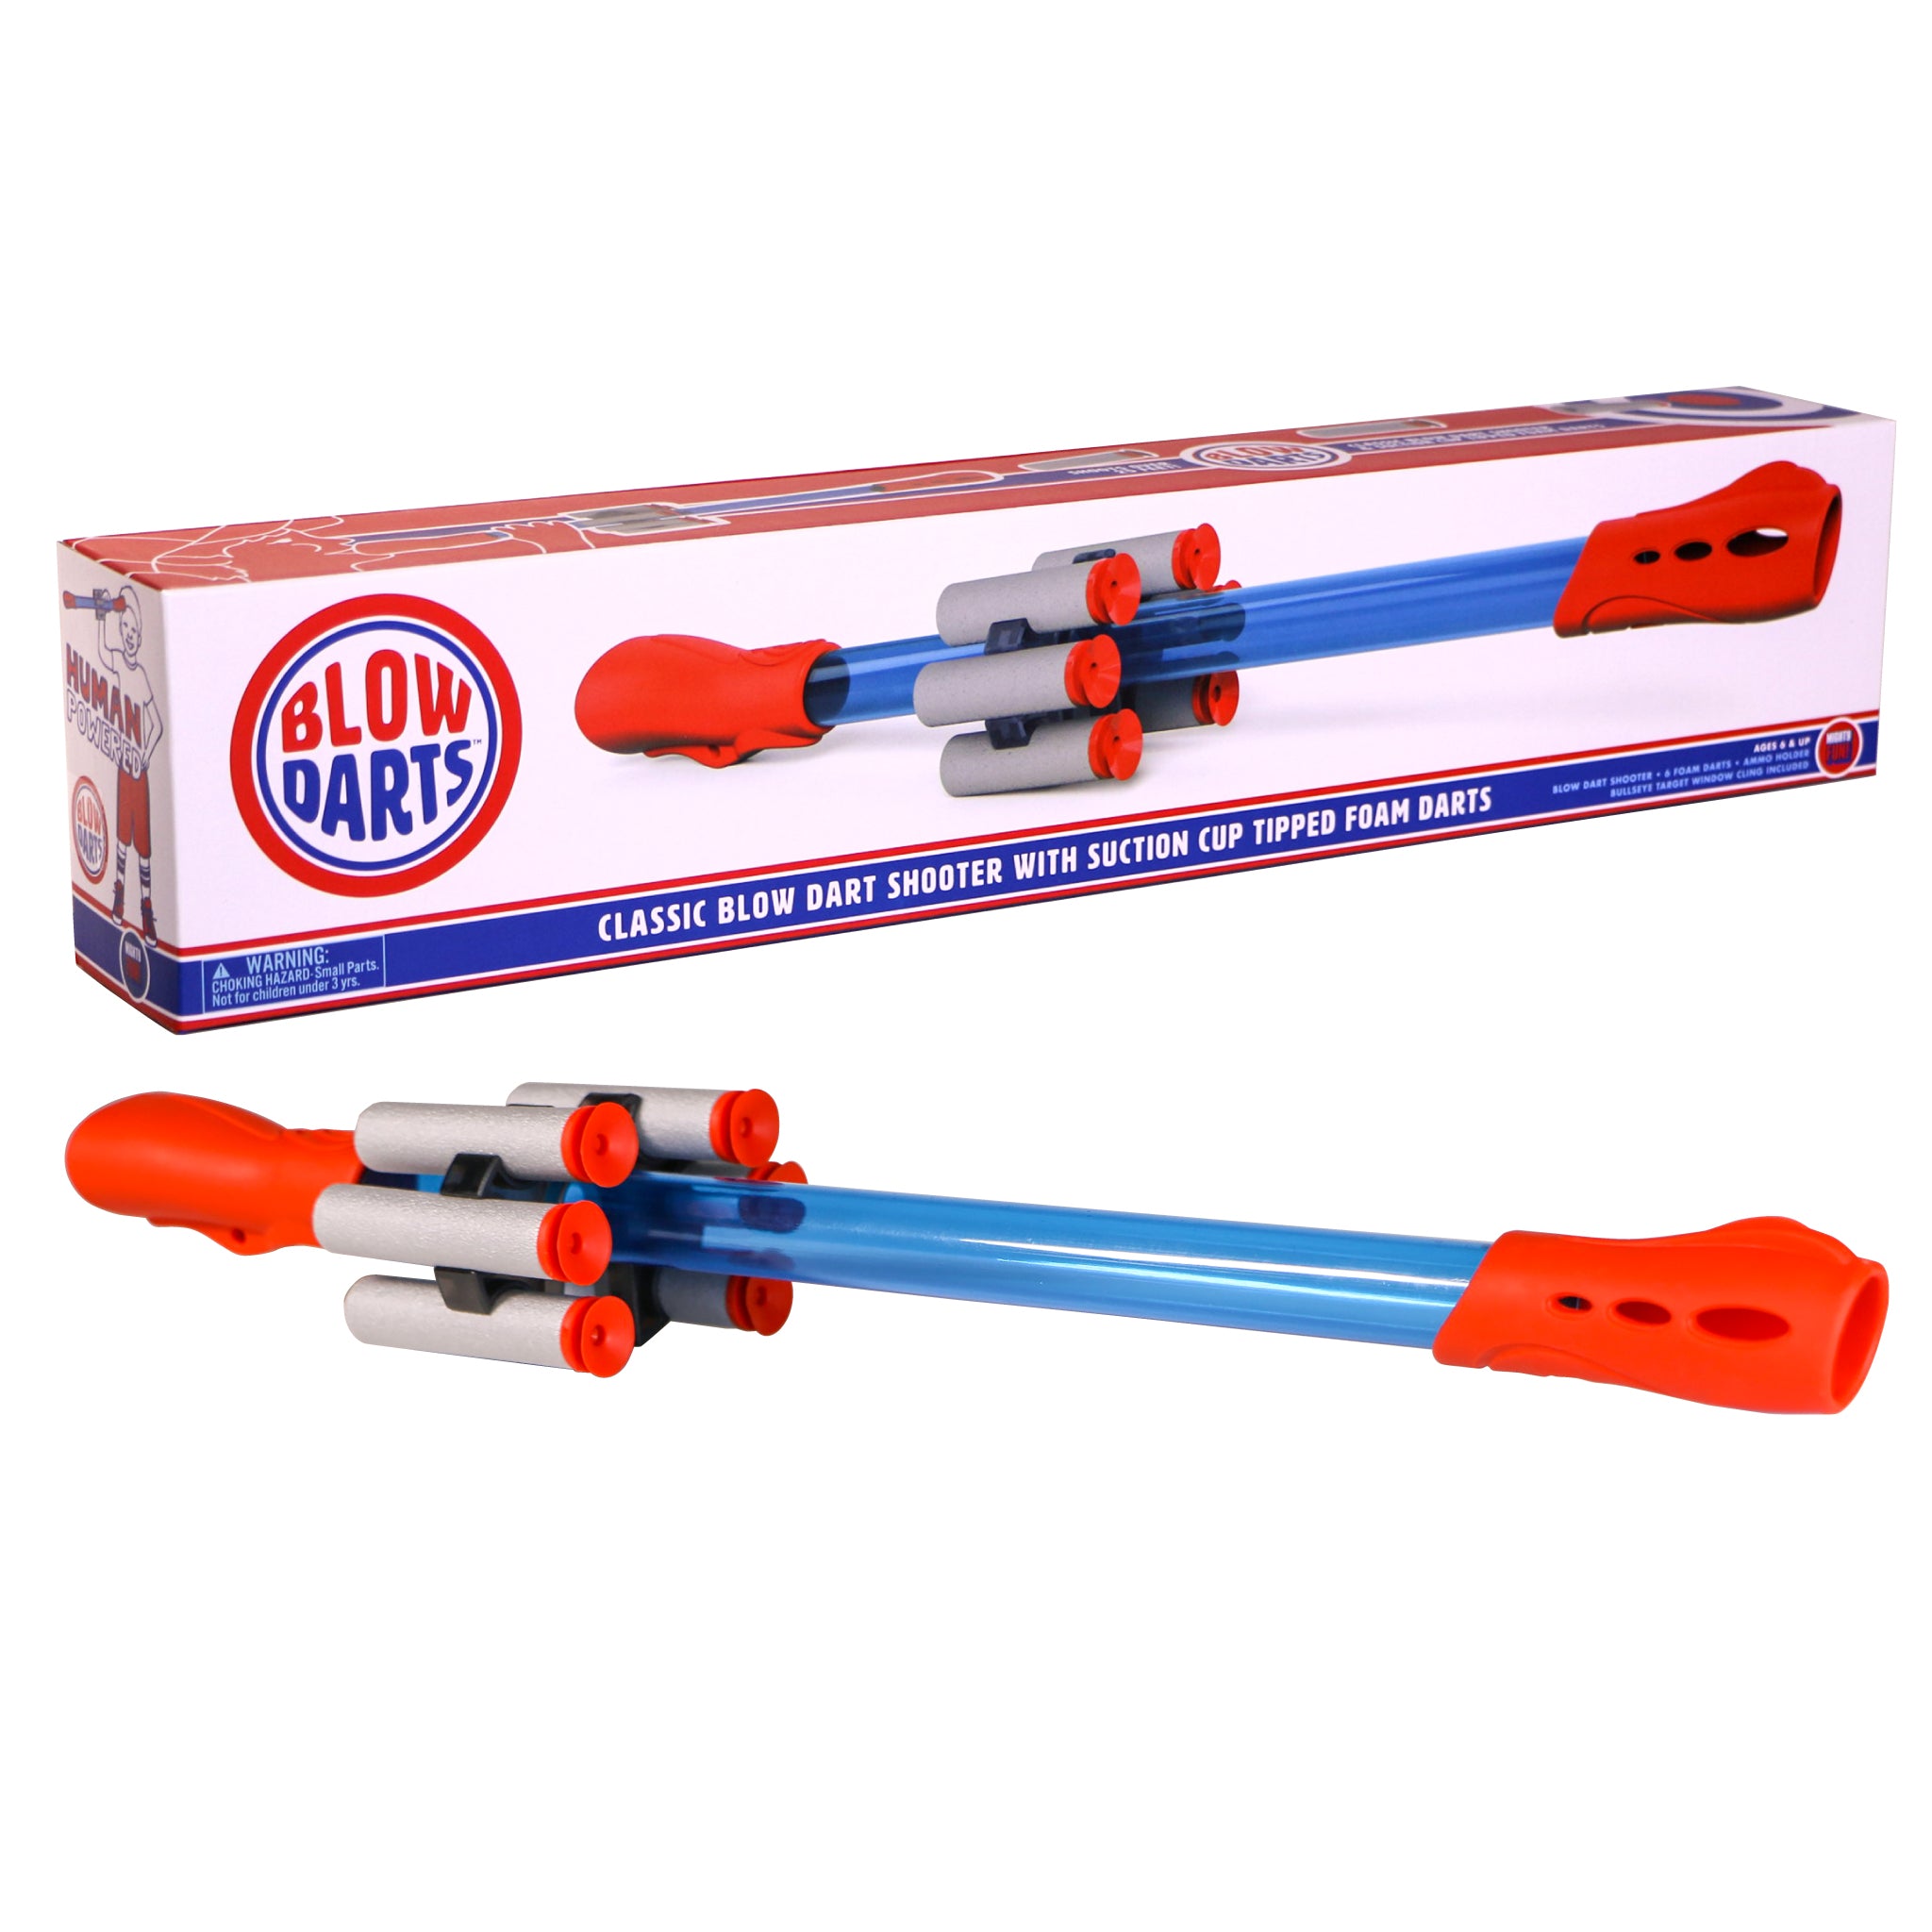 Blow Darts target set with color gift box by Mighty Fun! Includes 6 darts, ammo holder and target.